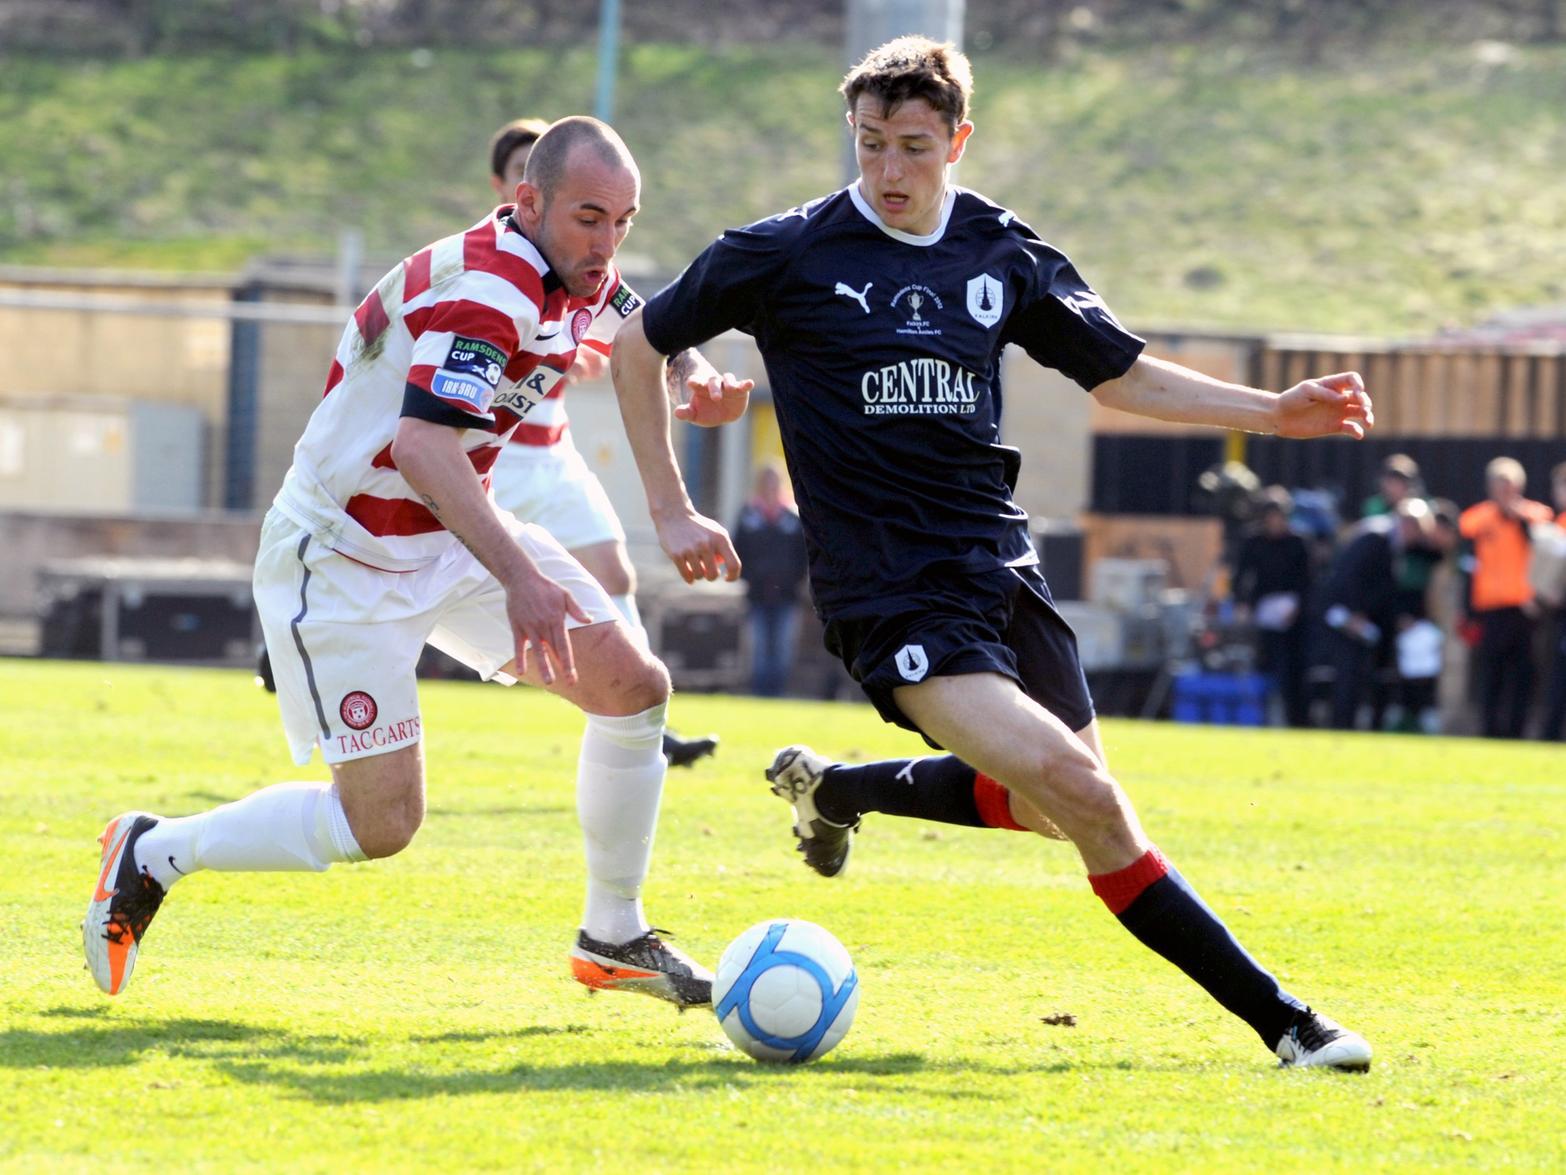 The Scotland U21 cap left Falkirk to join Huddersfield Town and was back on-loan at the Bairns at the time of the semi-final. He went on to turn out for Scunthorpe United and is now with Milwall